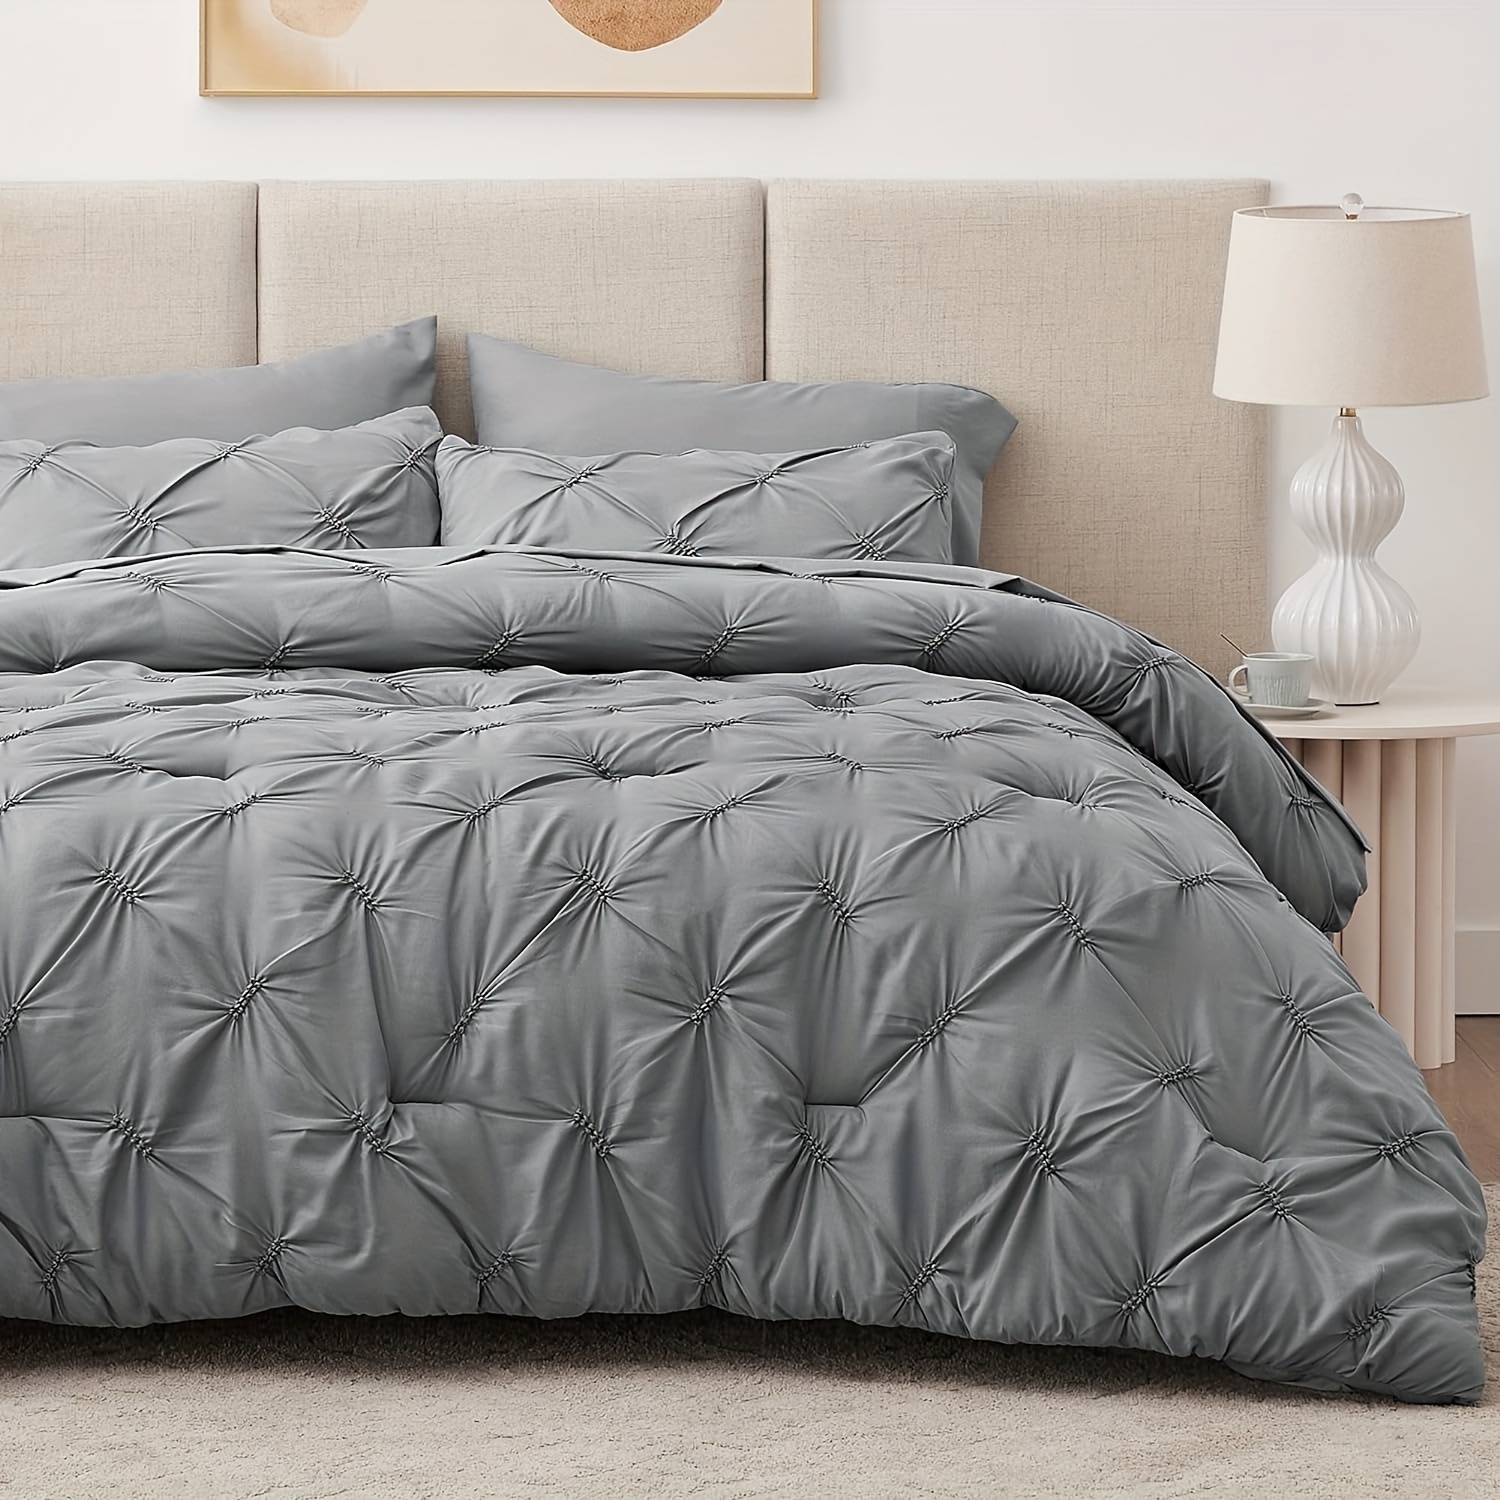 

Comforter Set - 7 Pieces Pintuck Bedding Sets, Bed Set For All Season, Bed In A Bag With Comforter, Flat Sheet And Fitted Sheet, Pillowcases & Shams